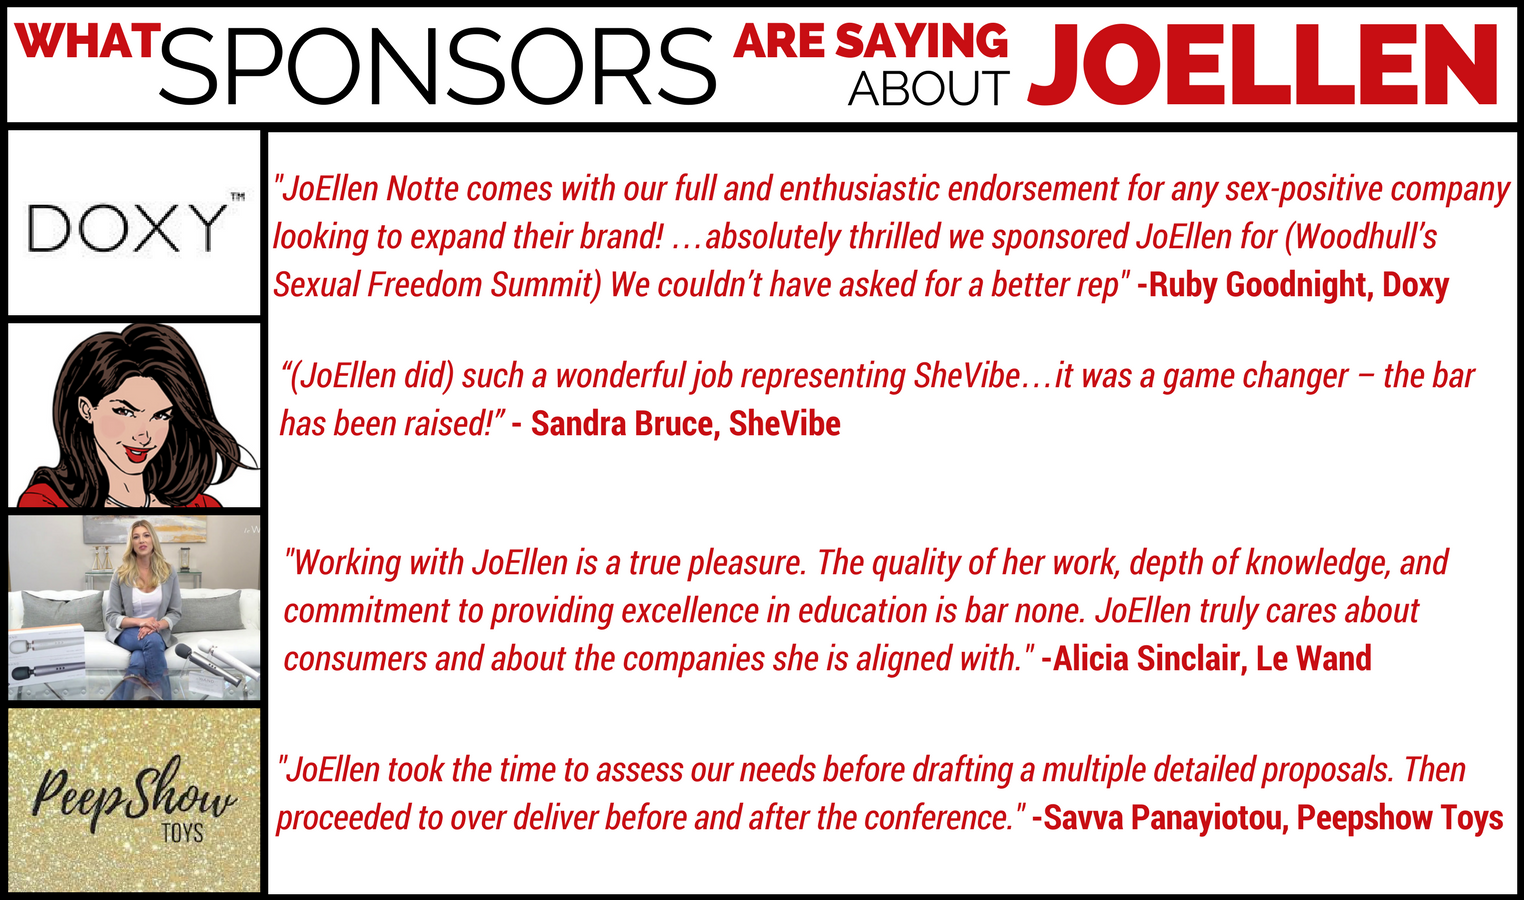 “JoEllen Notte comes with our full and enthusiastic endorsement for any sex-positive company looking to expand their brand! …absolutely thrilled we sponsored JoEllen for (Woodhull’s Sexual Freedom Summit) We couldn’t have asked for a better rep” – Ruby Goodnight, Doxy Massager “(JoEllen did) such a wonderful job representing SheVibe…it was a game changer – the bar has been raised!”  - Sandra Bruce, SheVibe.com "Working with JoEllen is a true pleasure. The quality of her work, depth of knowledge, and commitment to providing excellence in education is bar none. JoEllen truly cares about consumers and about the companies she is aligned with." - Alicia Sinclair, Le Wand "JoEllen took the time to assess our needs before drafting a multiple detailed proposals. Then proceeded to over deliver before and after the conference." - Savva Panayiotou, Peepshow Toys